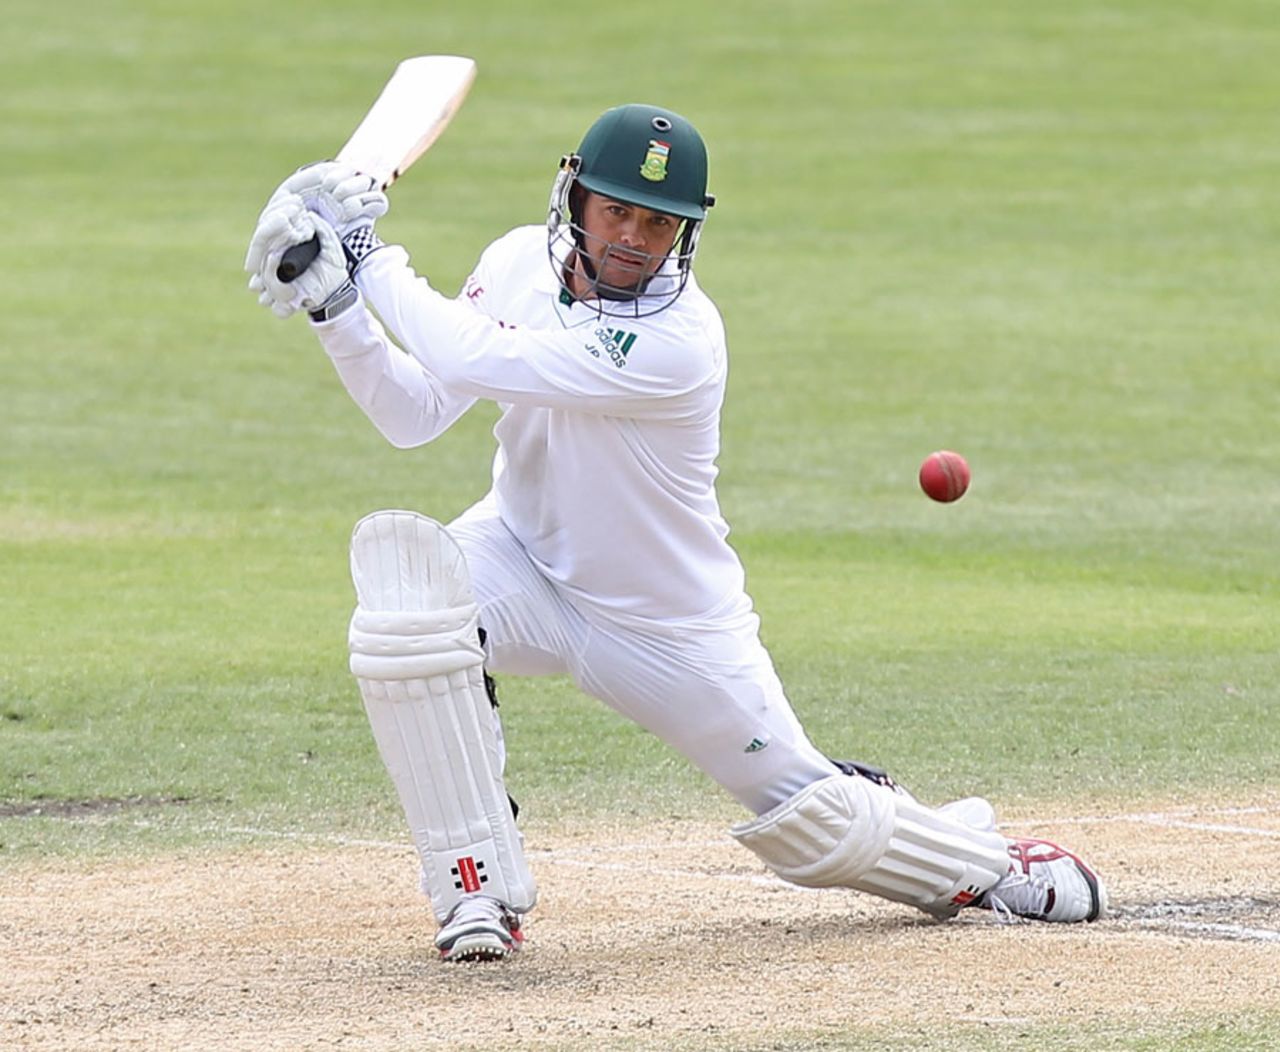 Jacques Rudolph leans into a drive, New Zealand v South Africa, 1st Test, Dunedin, 4th day, March 10, 2012